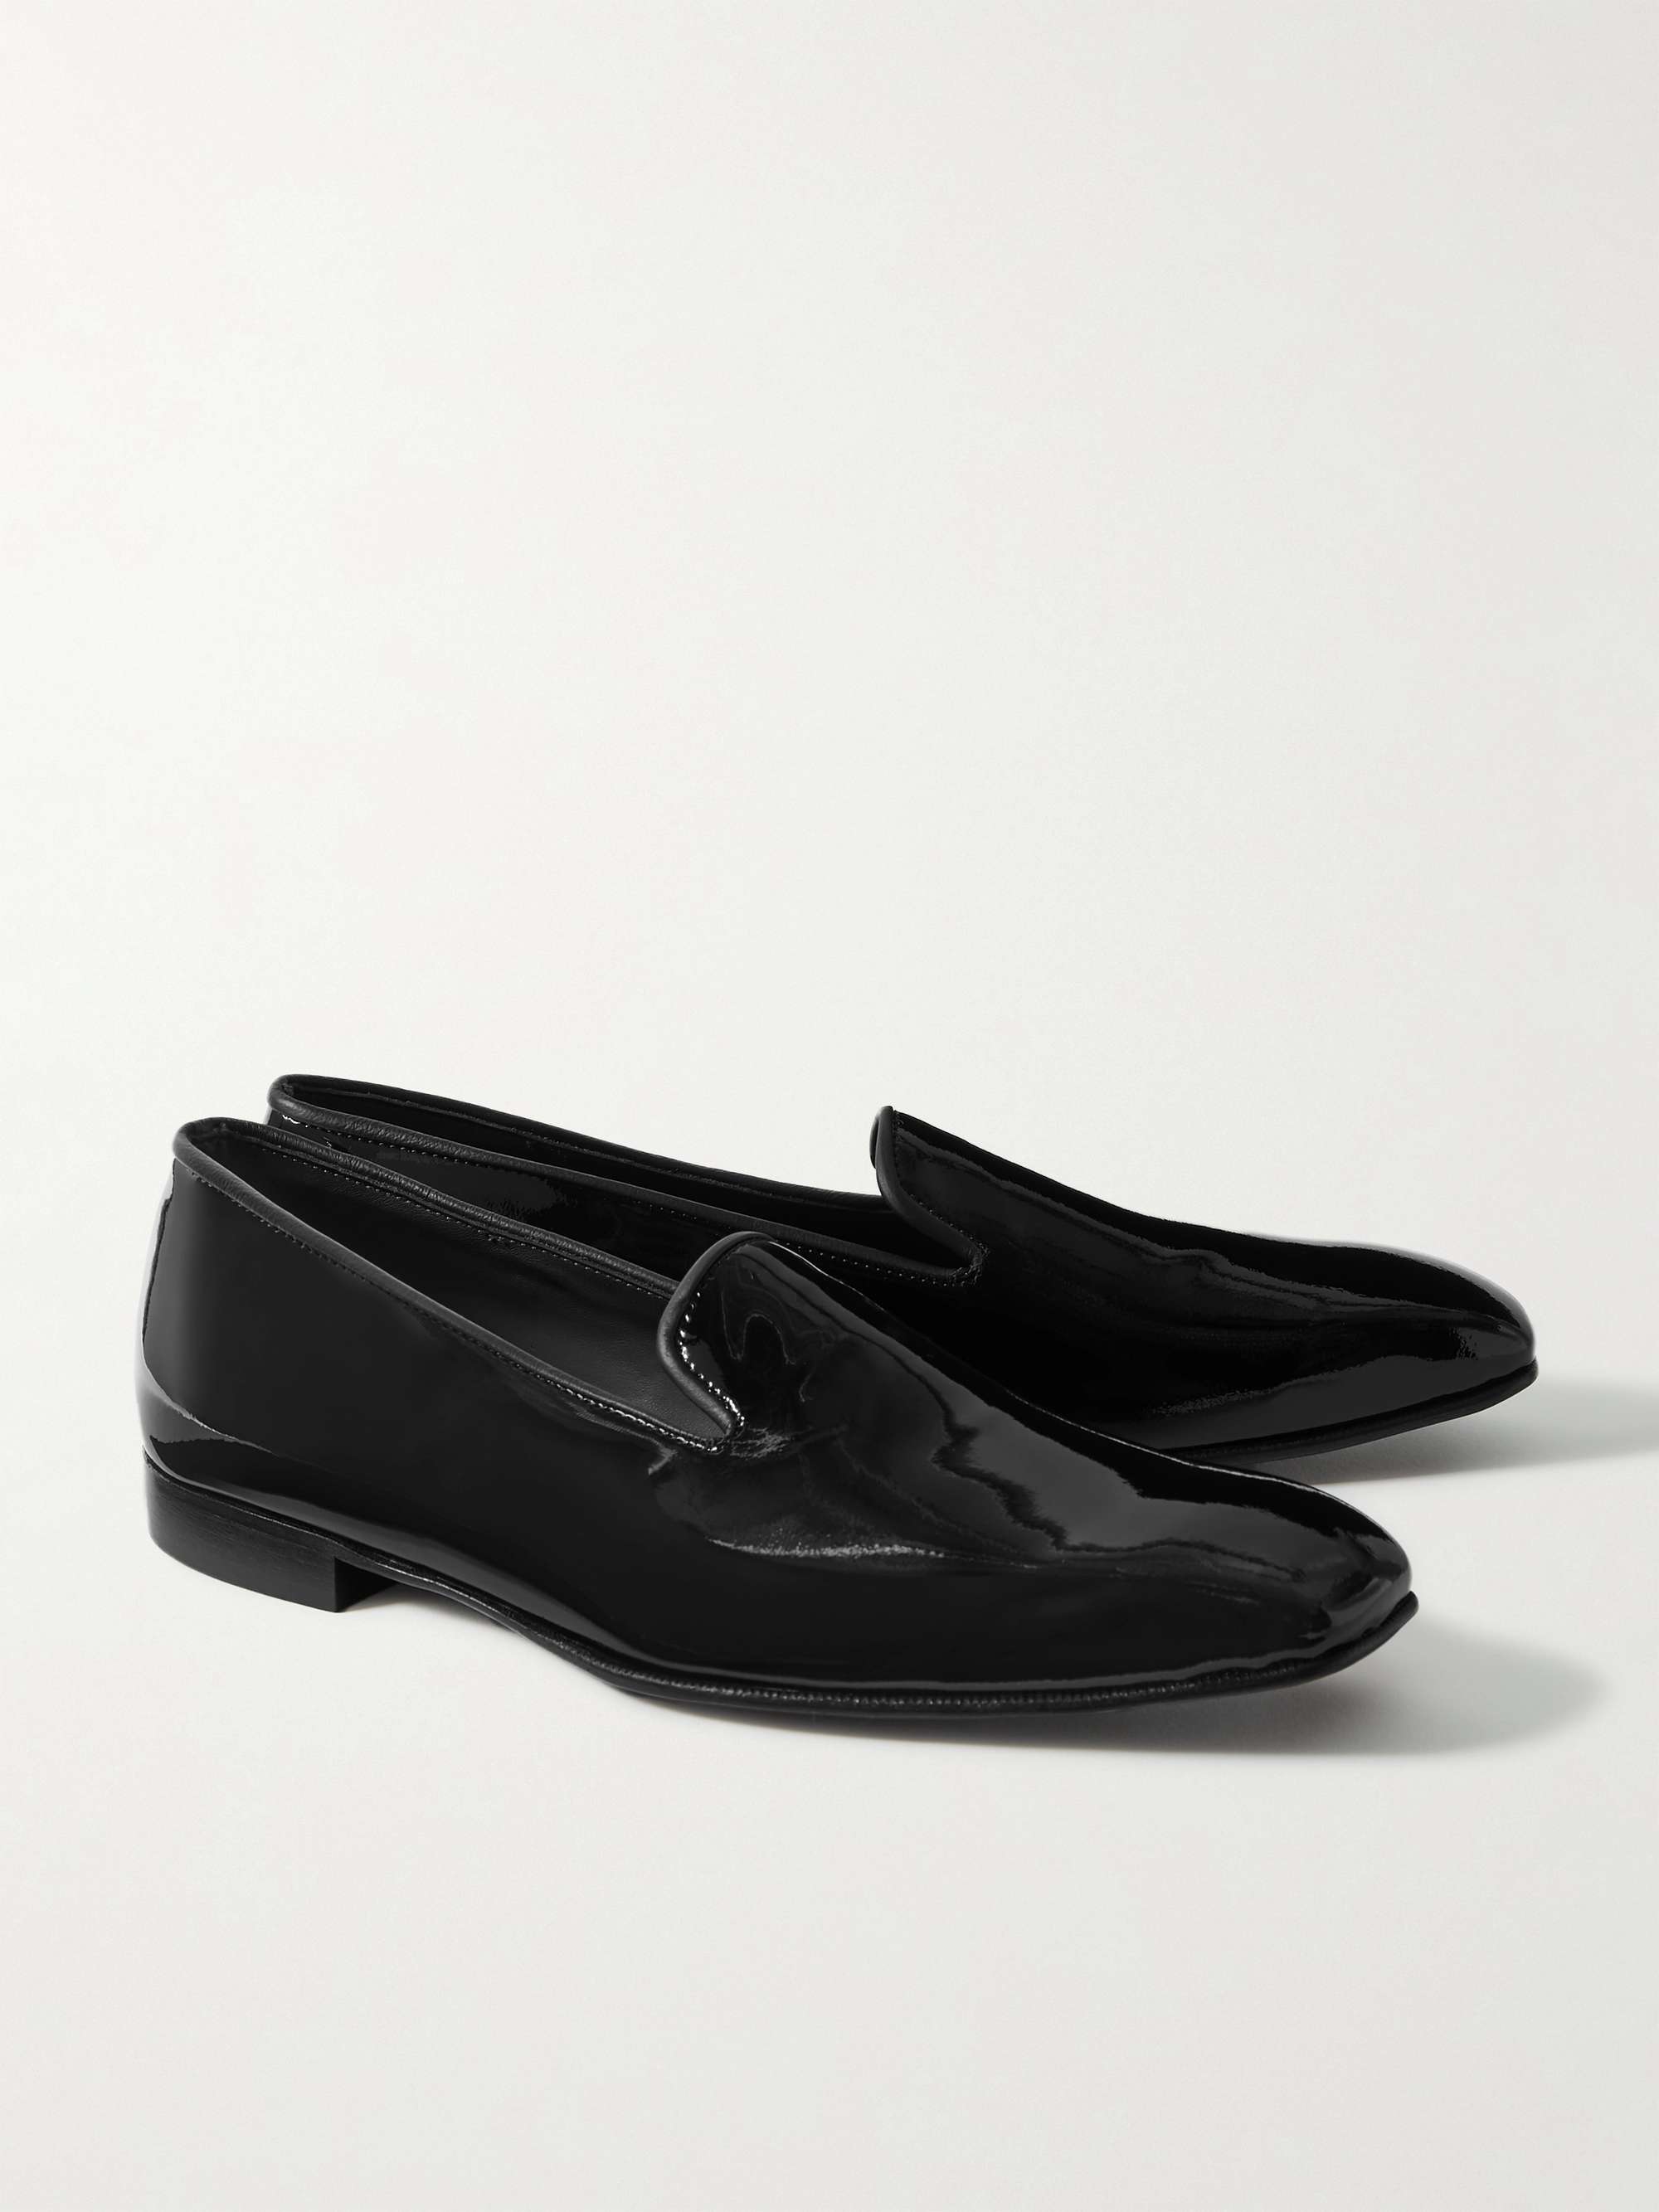 KINGSMAN + George Cleverley Windsor Patent-Leather Loafers